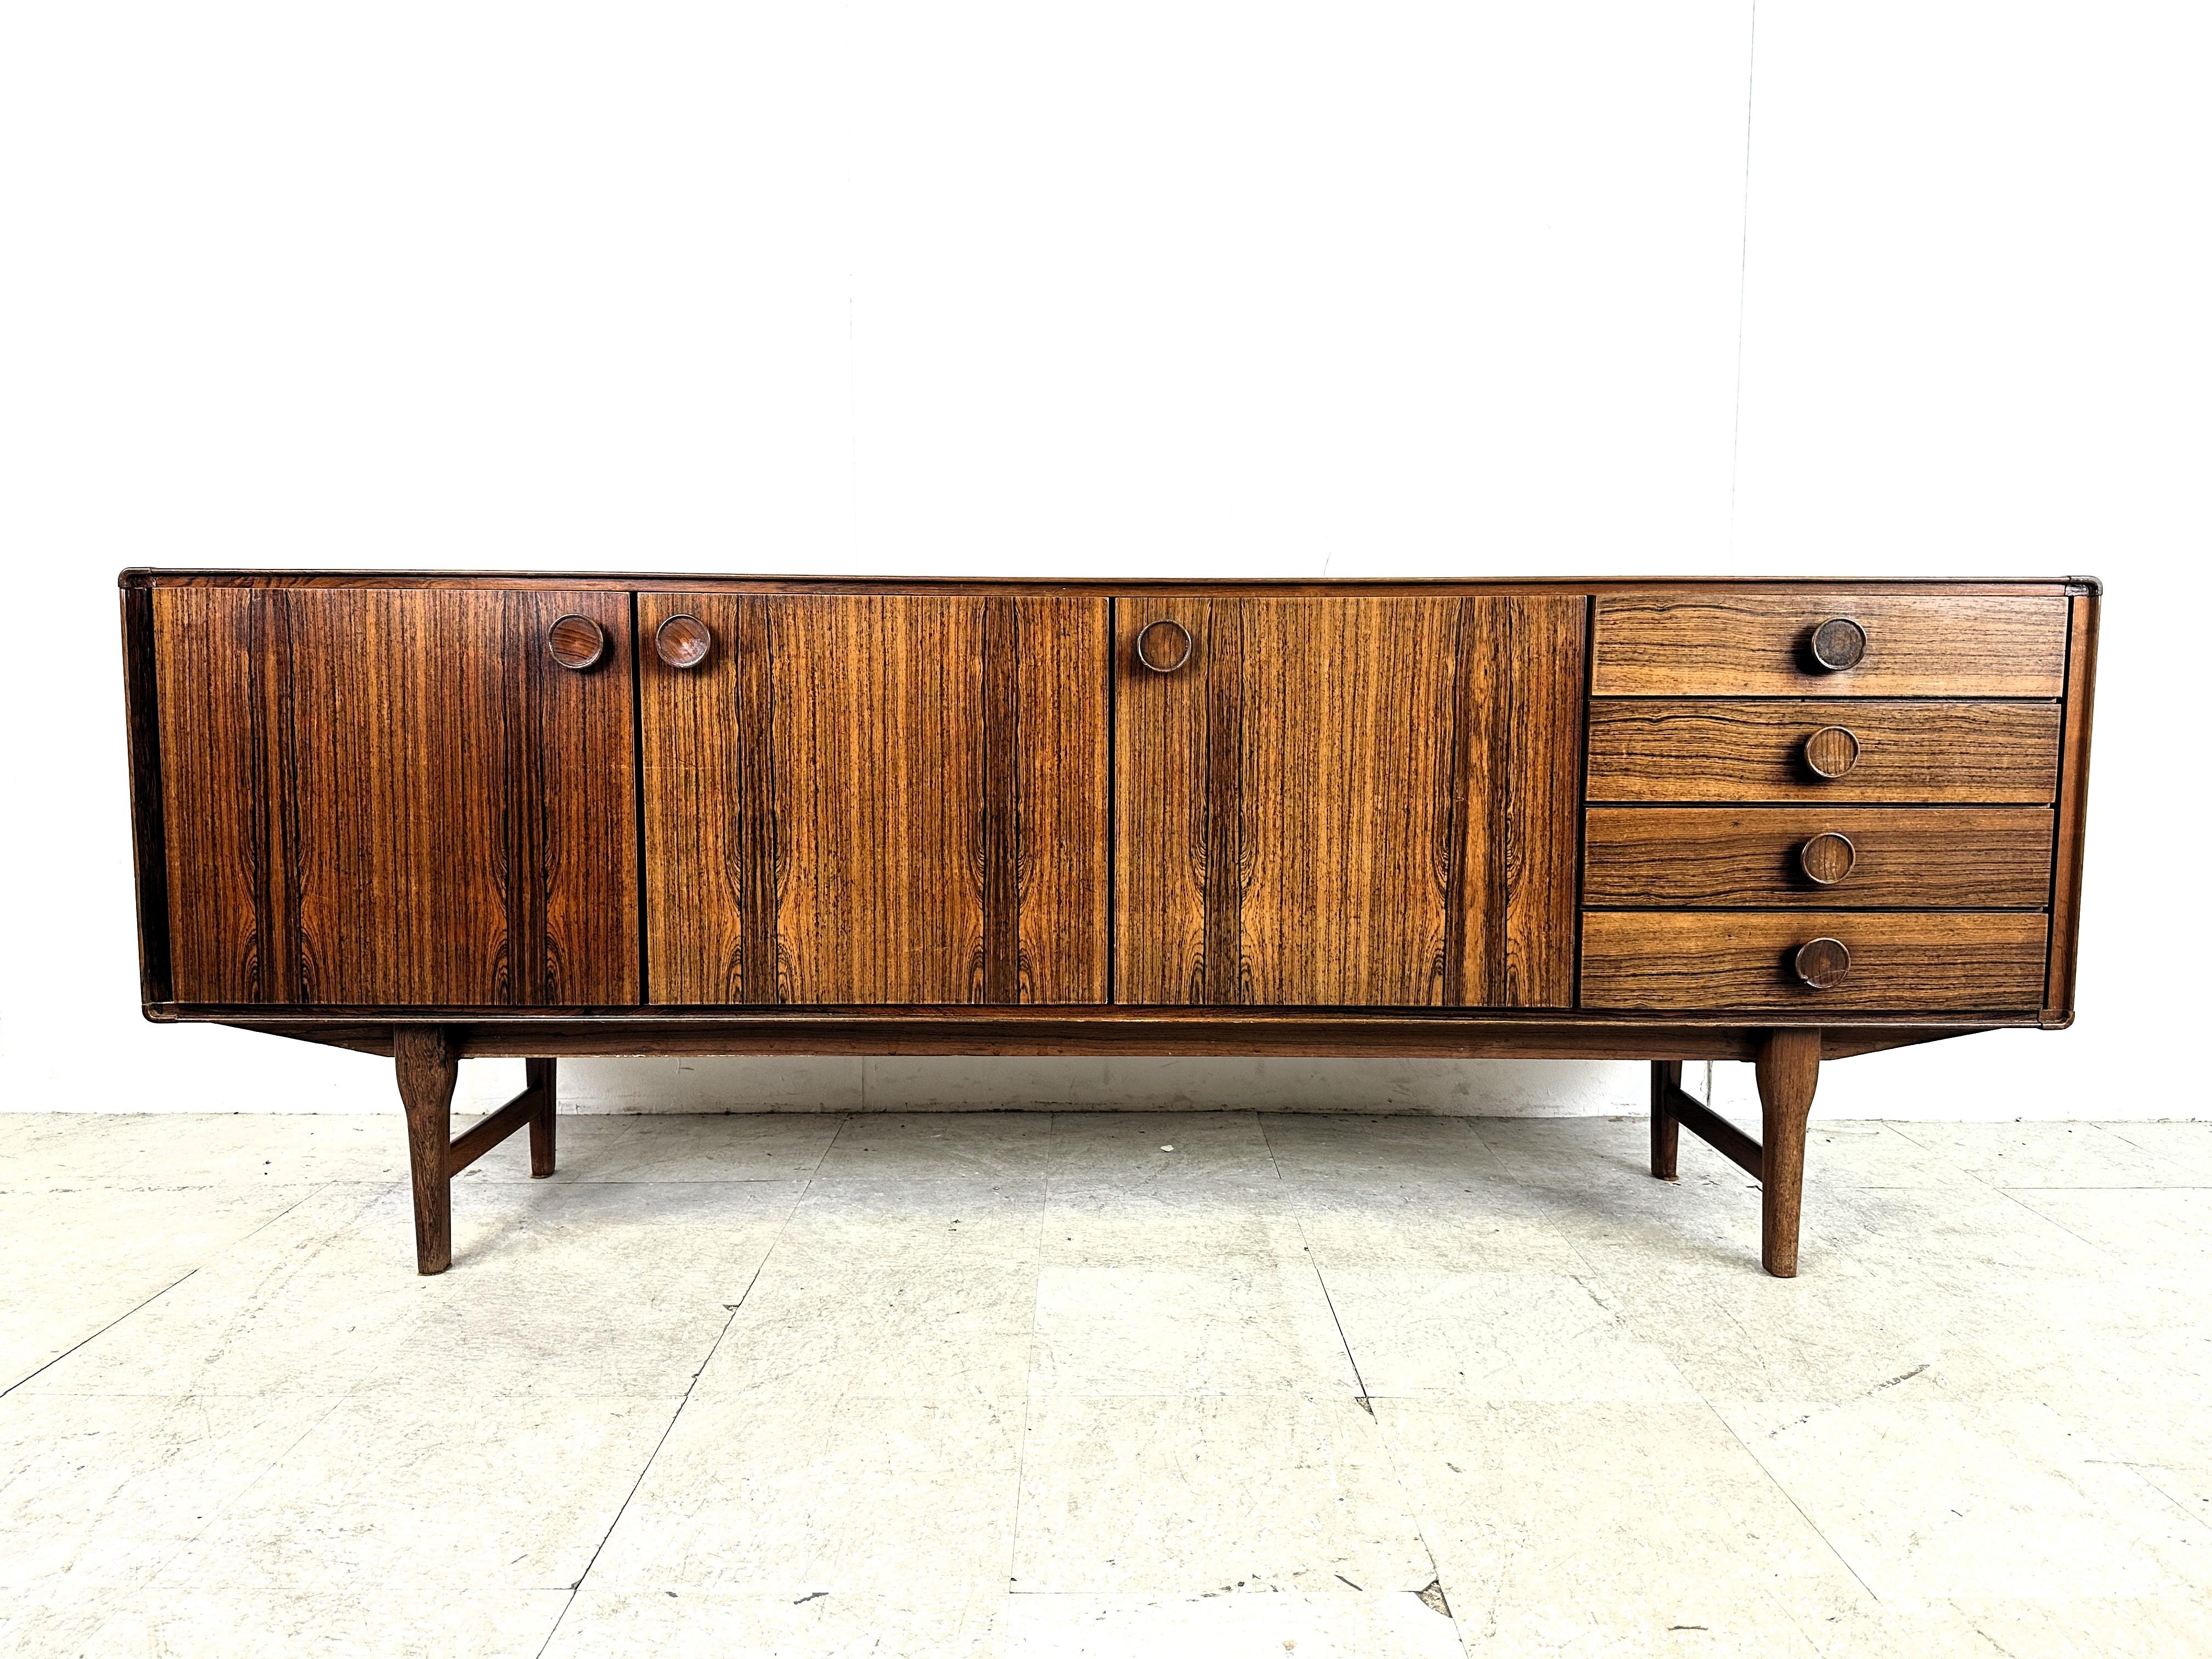 Gorgeous mid century sideboard model FDT-1205 by Fristho Franeker with beautiful natural wood veining. 

The sideboard has 3 doors and 4 drawers each with a beautifully crafted handle.

The legs also have an elegant design to them.

Good overall